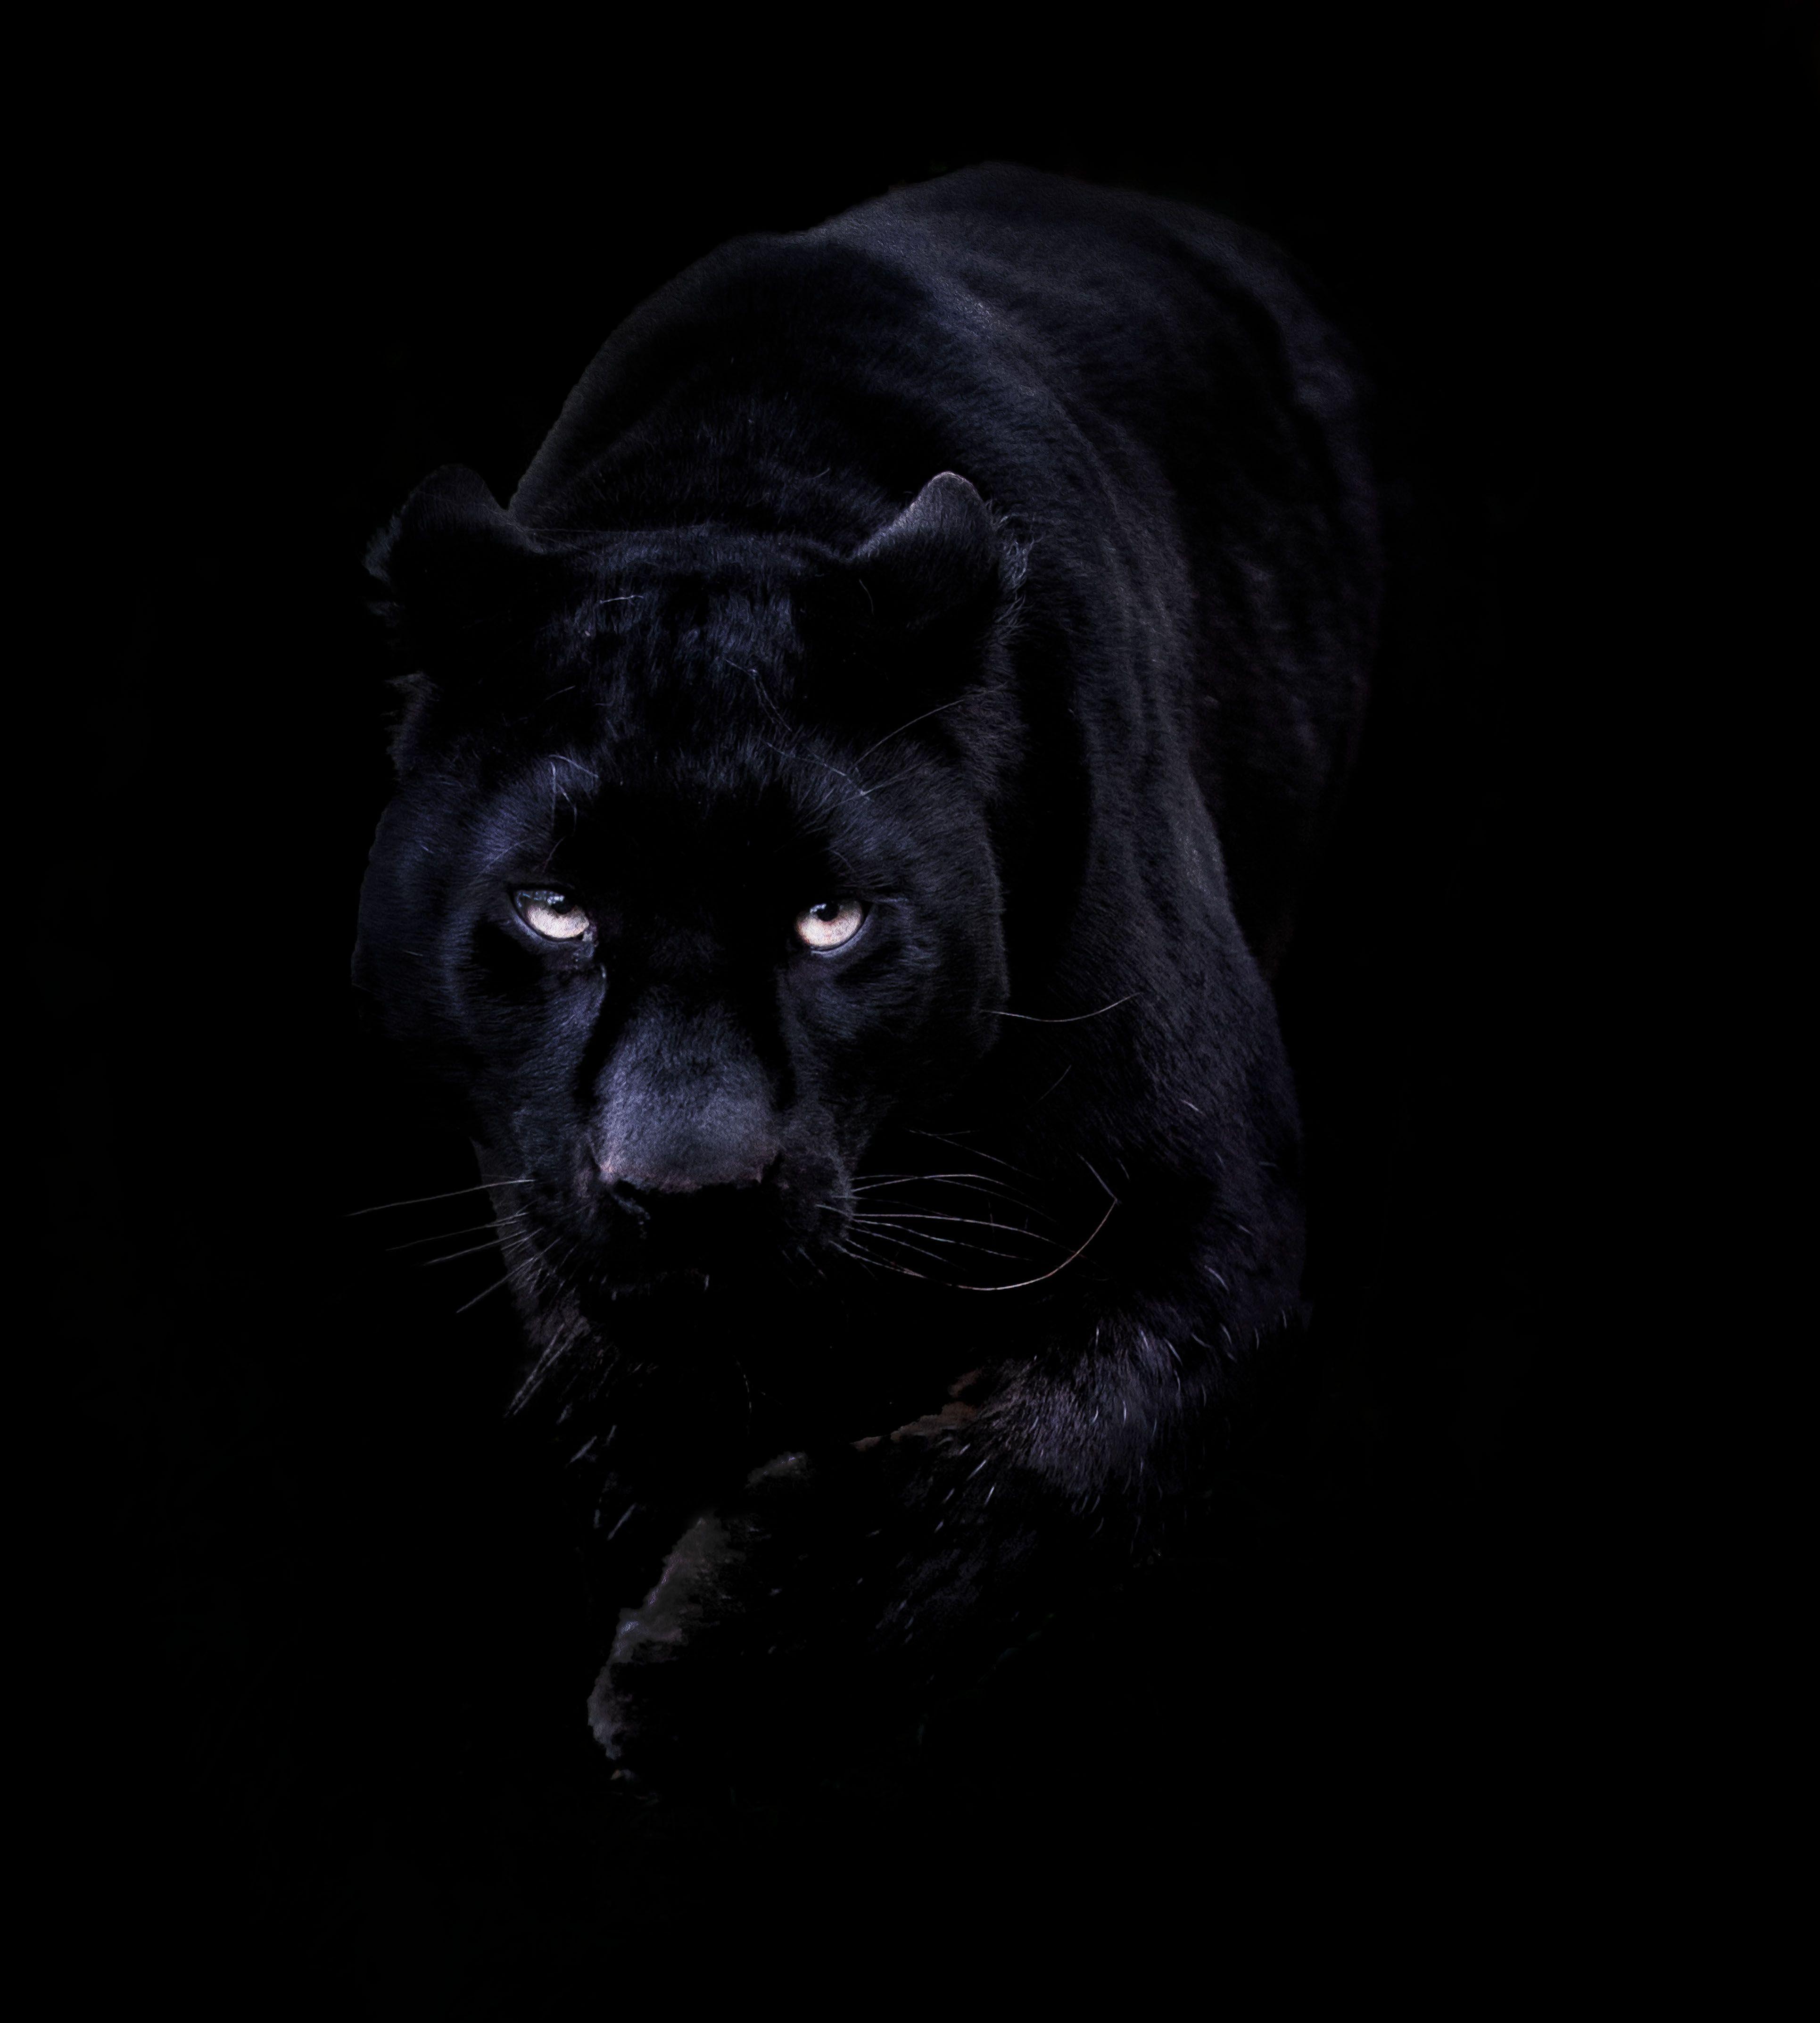 Black Panther Wallpaper High Quality